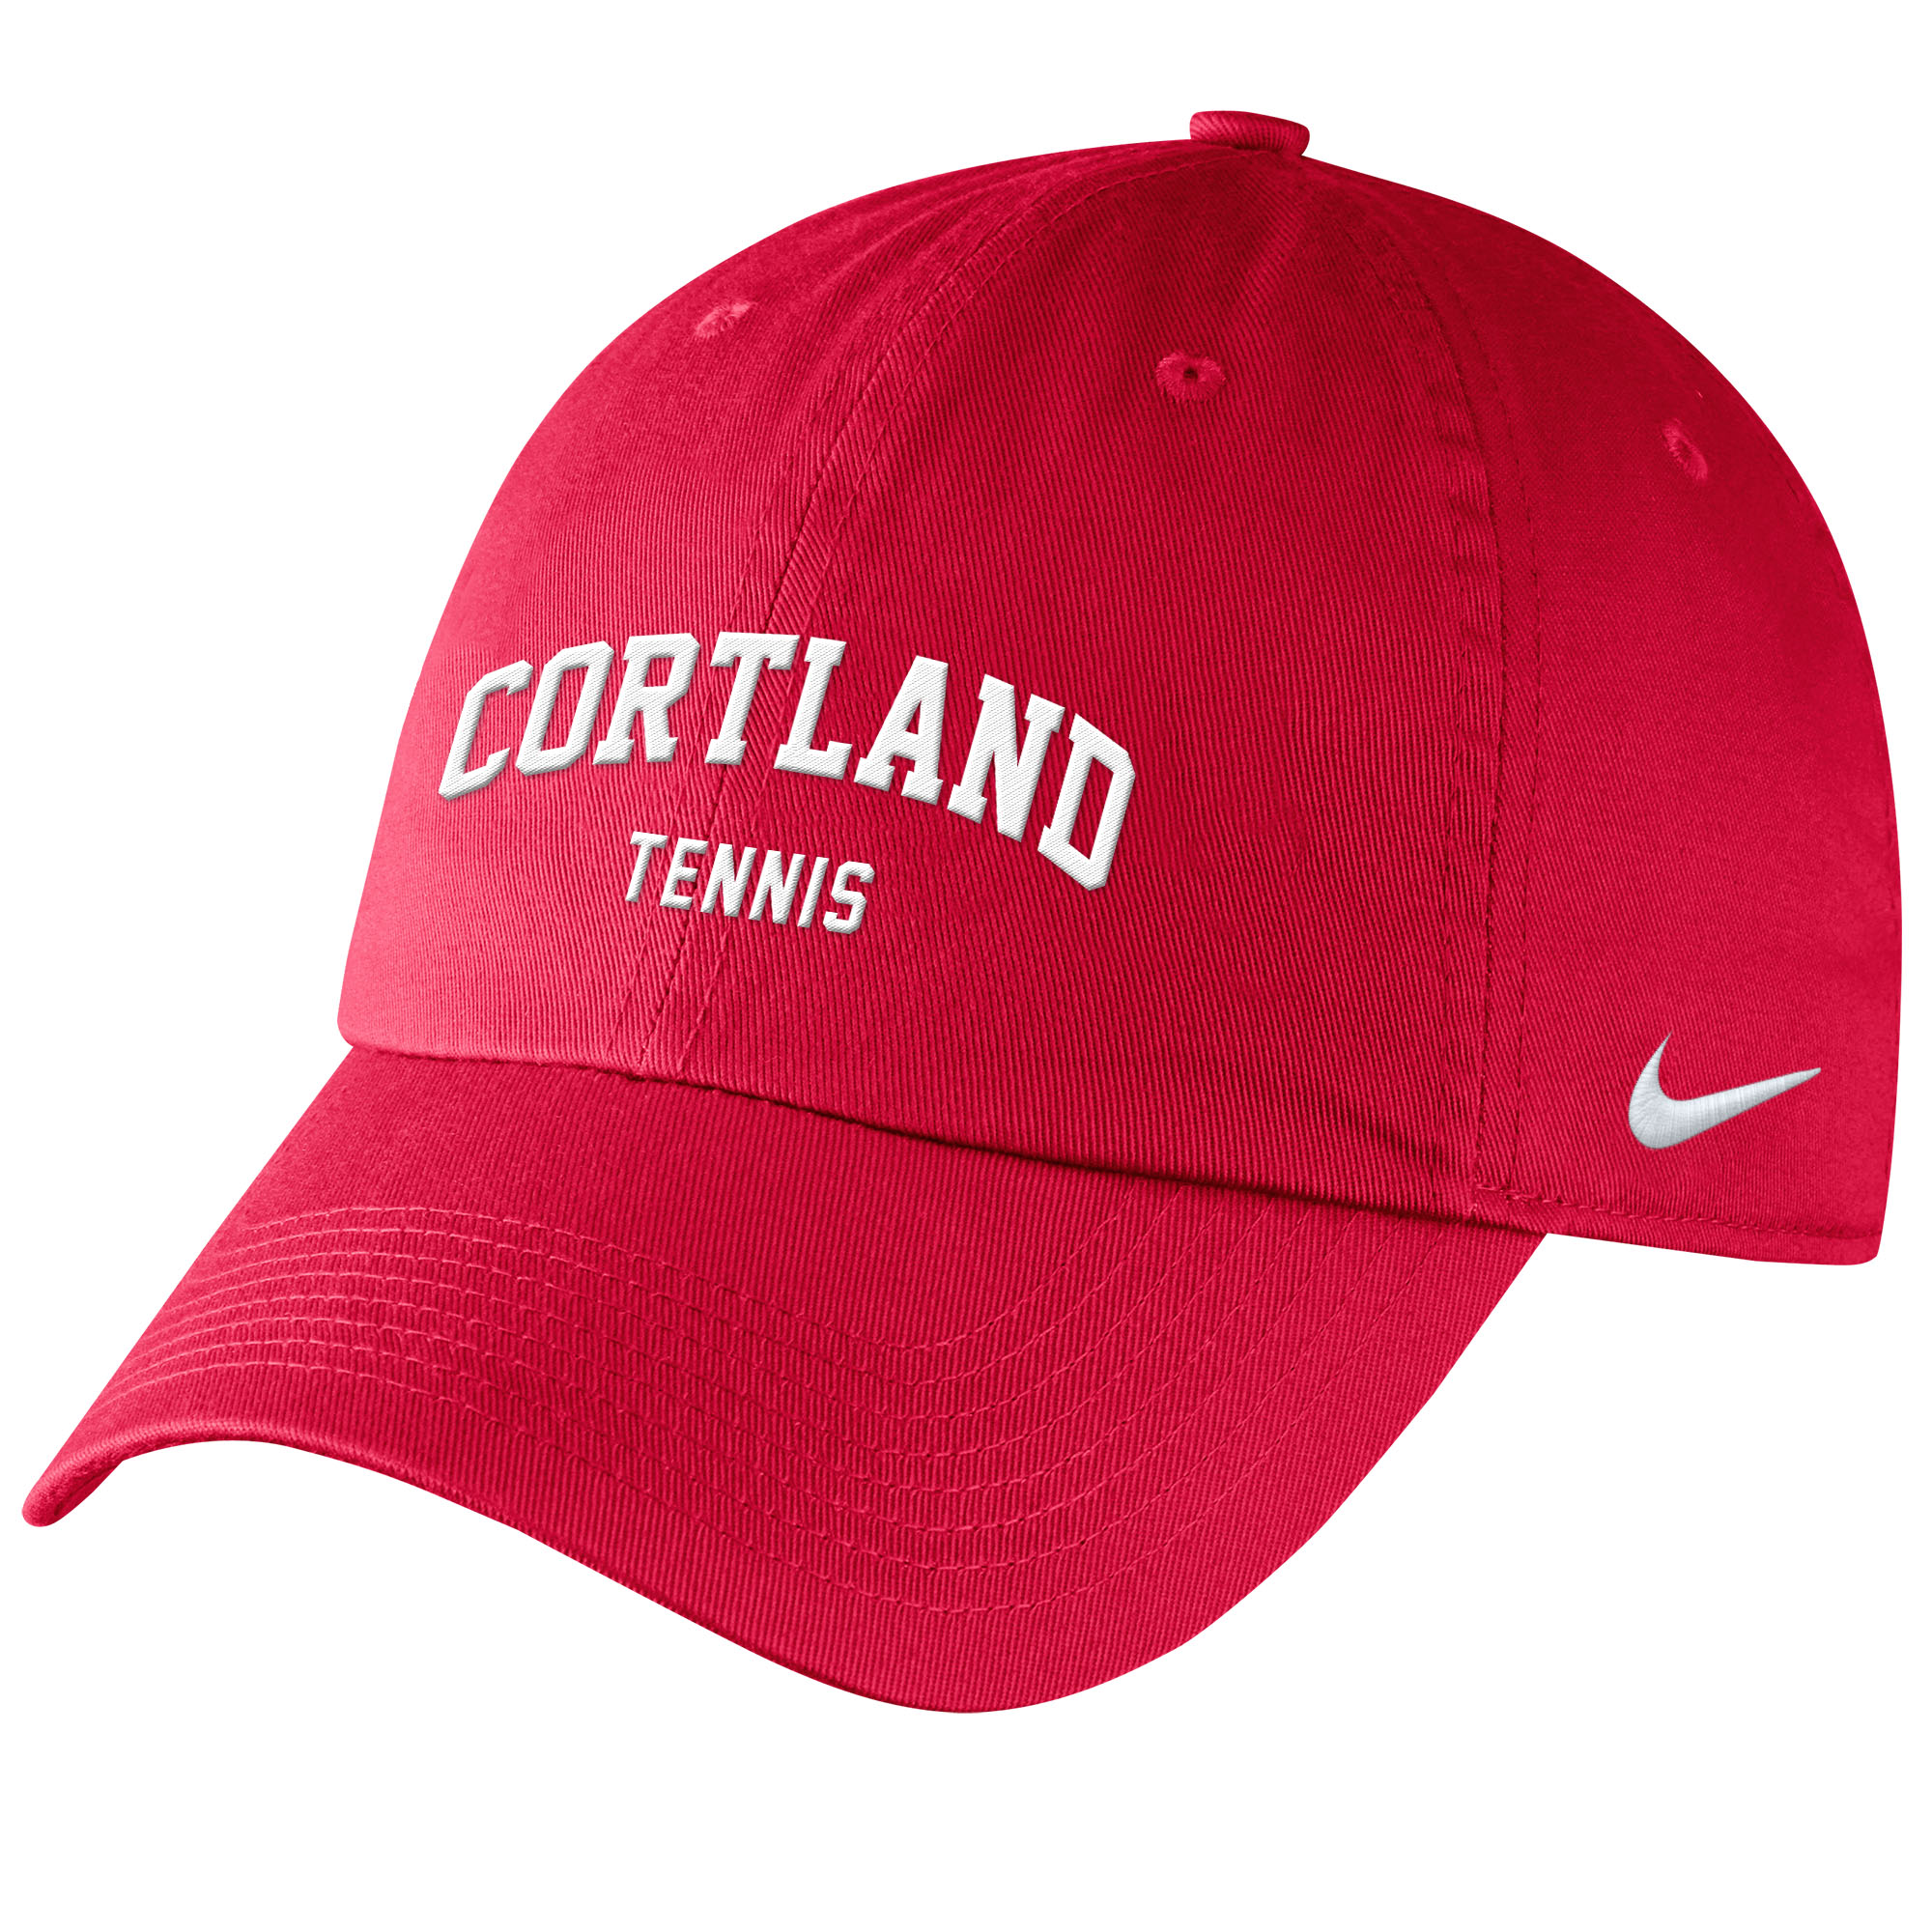 Sports Merch | The Campus Store